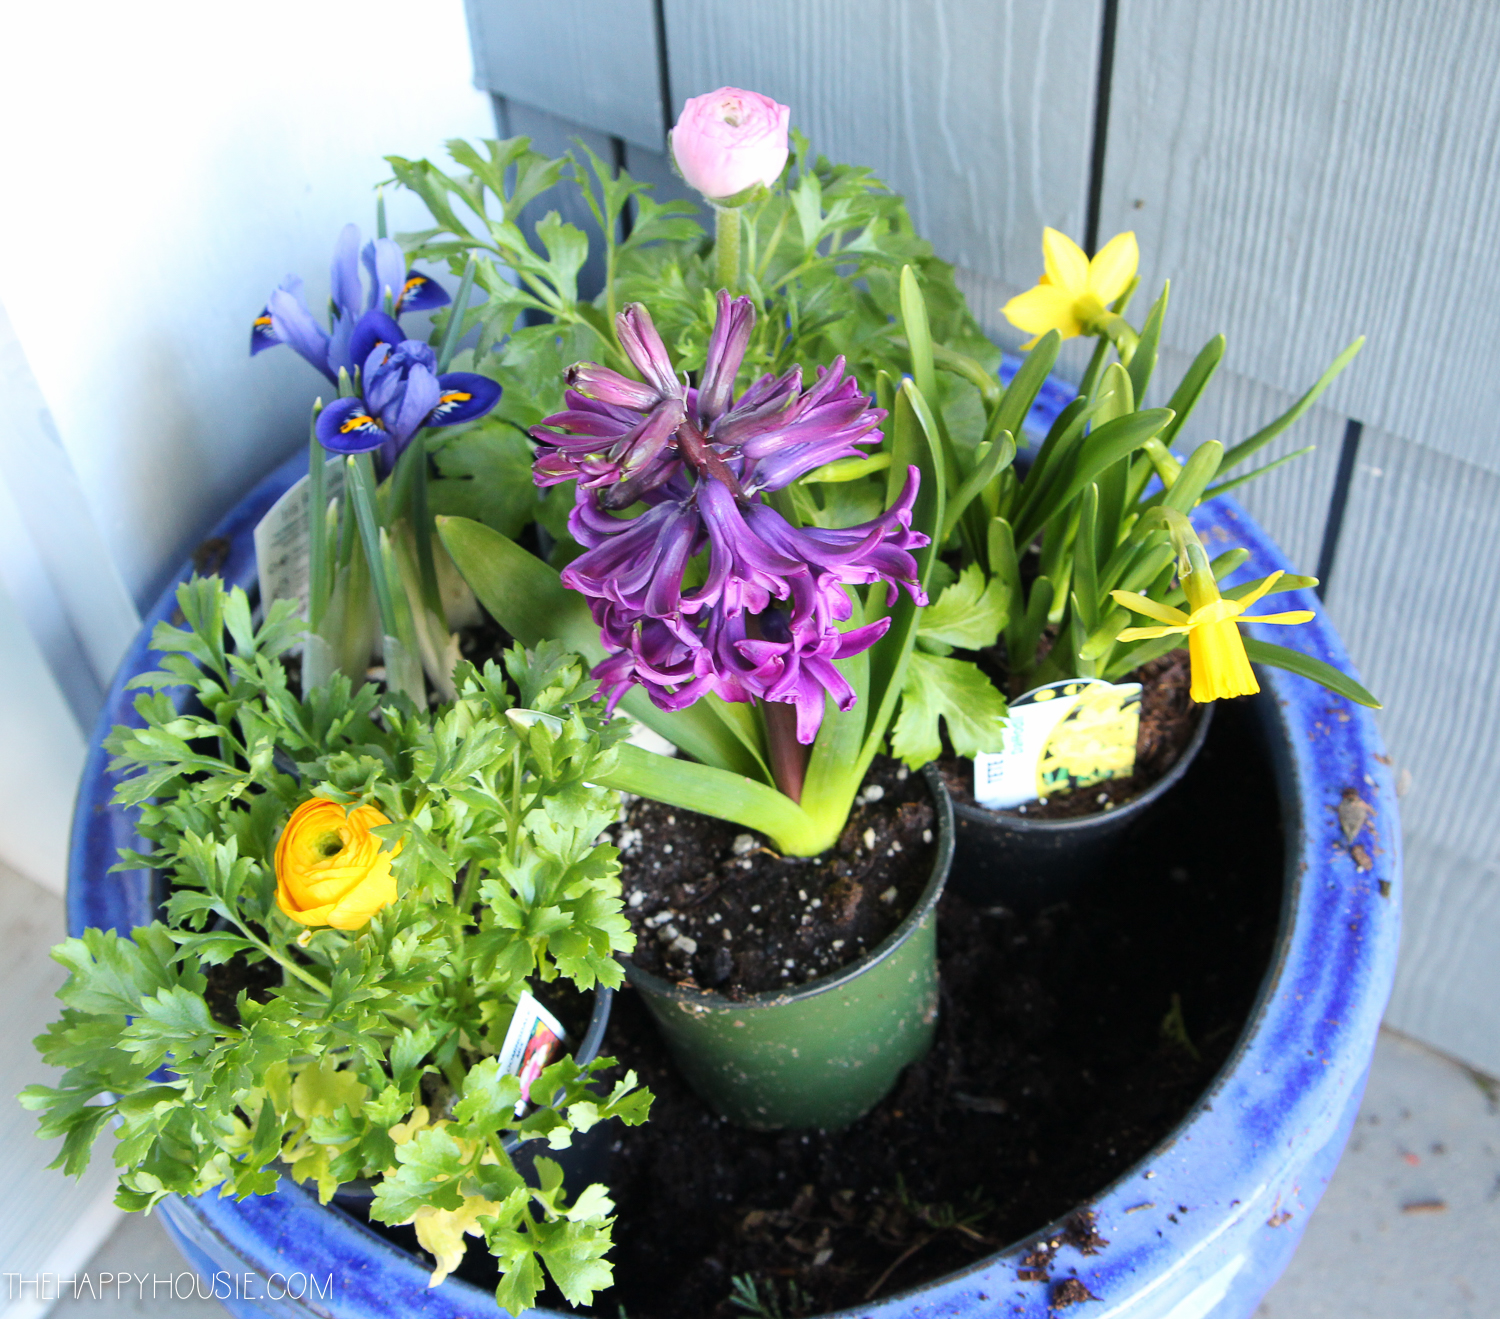 Organizing the floral containers in the planter.